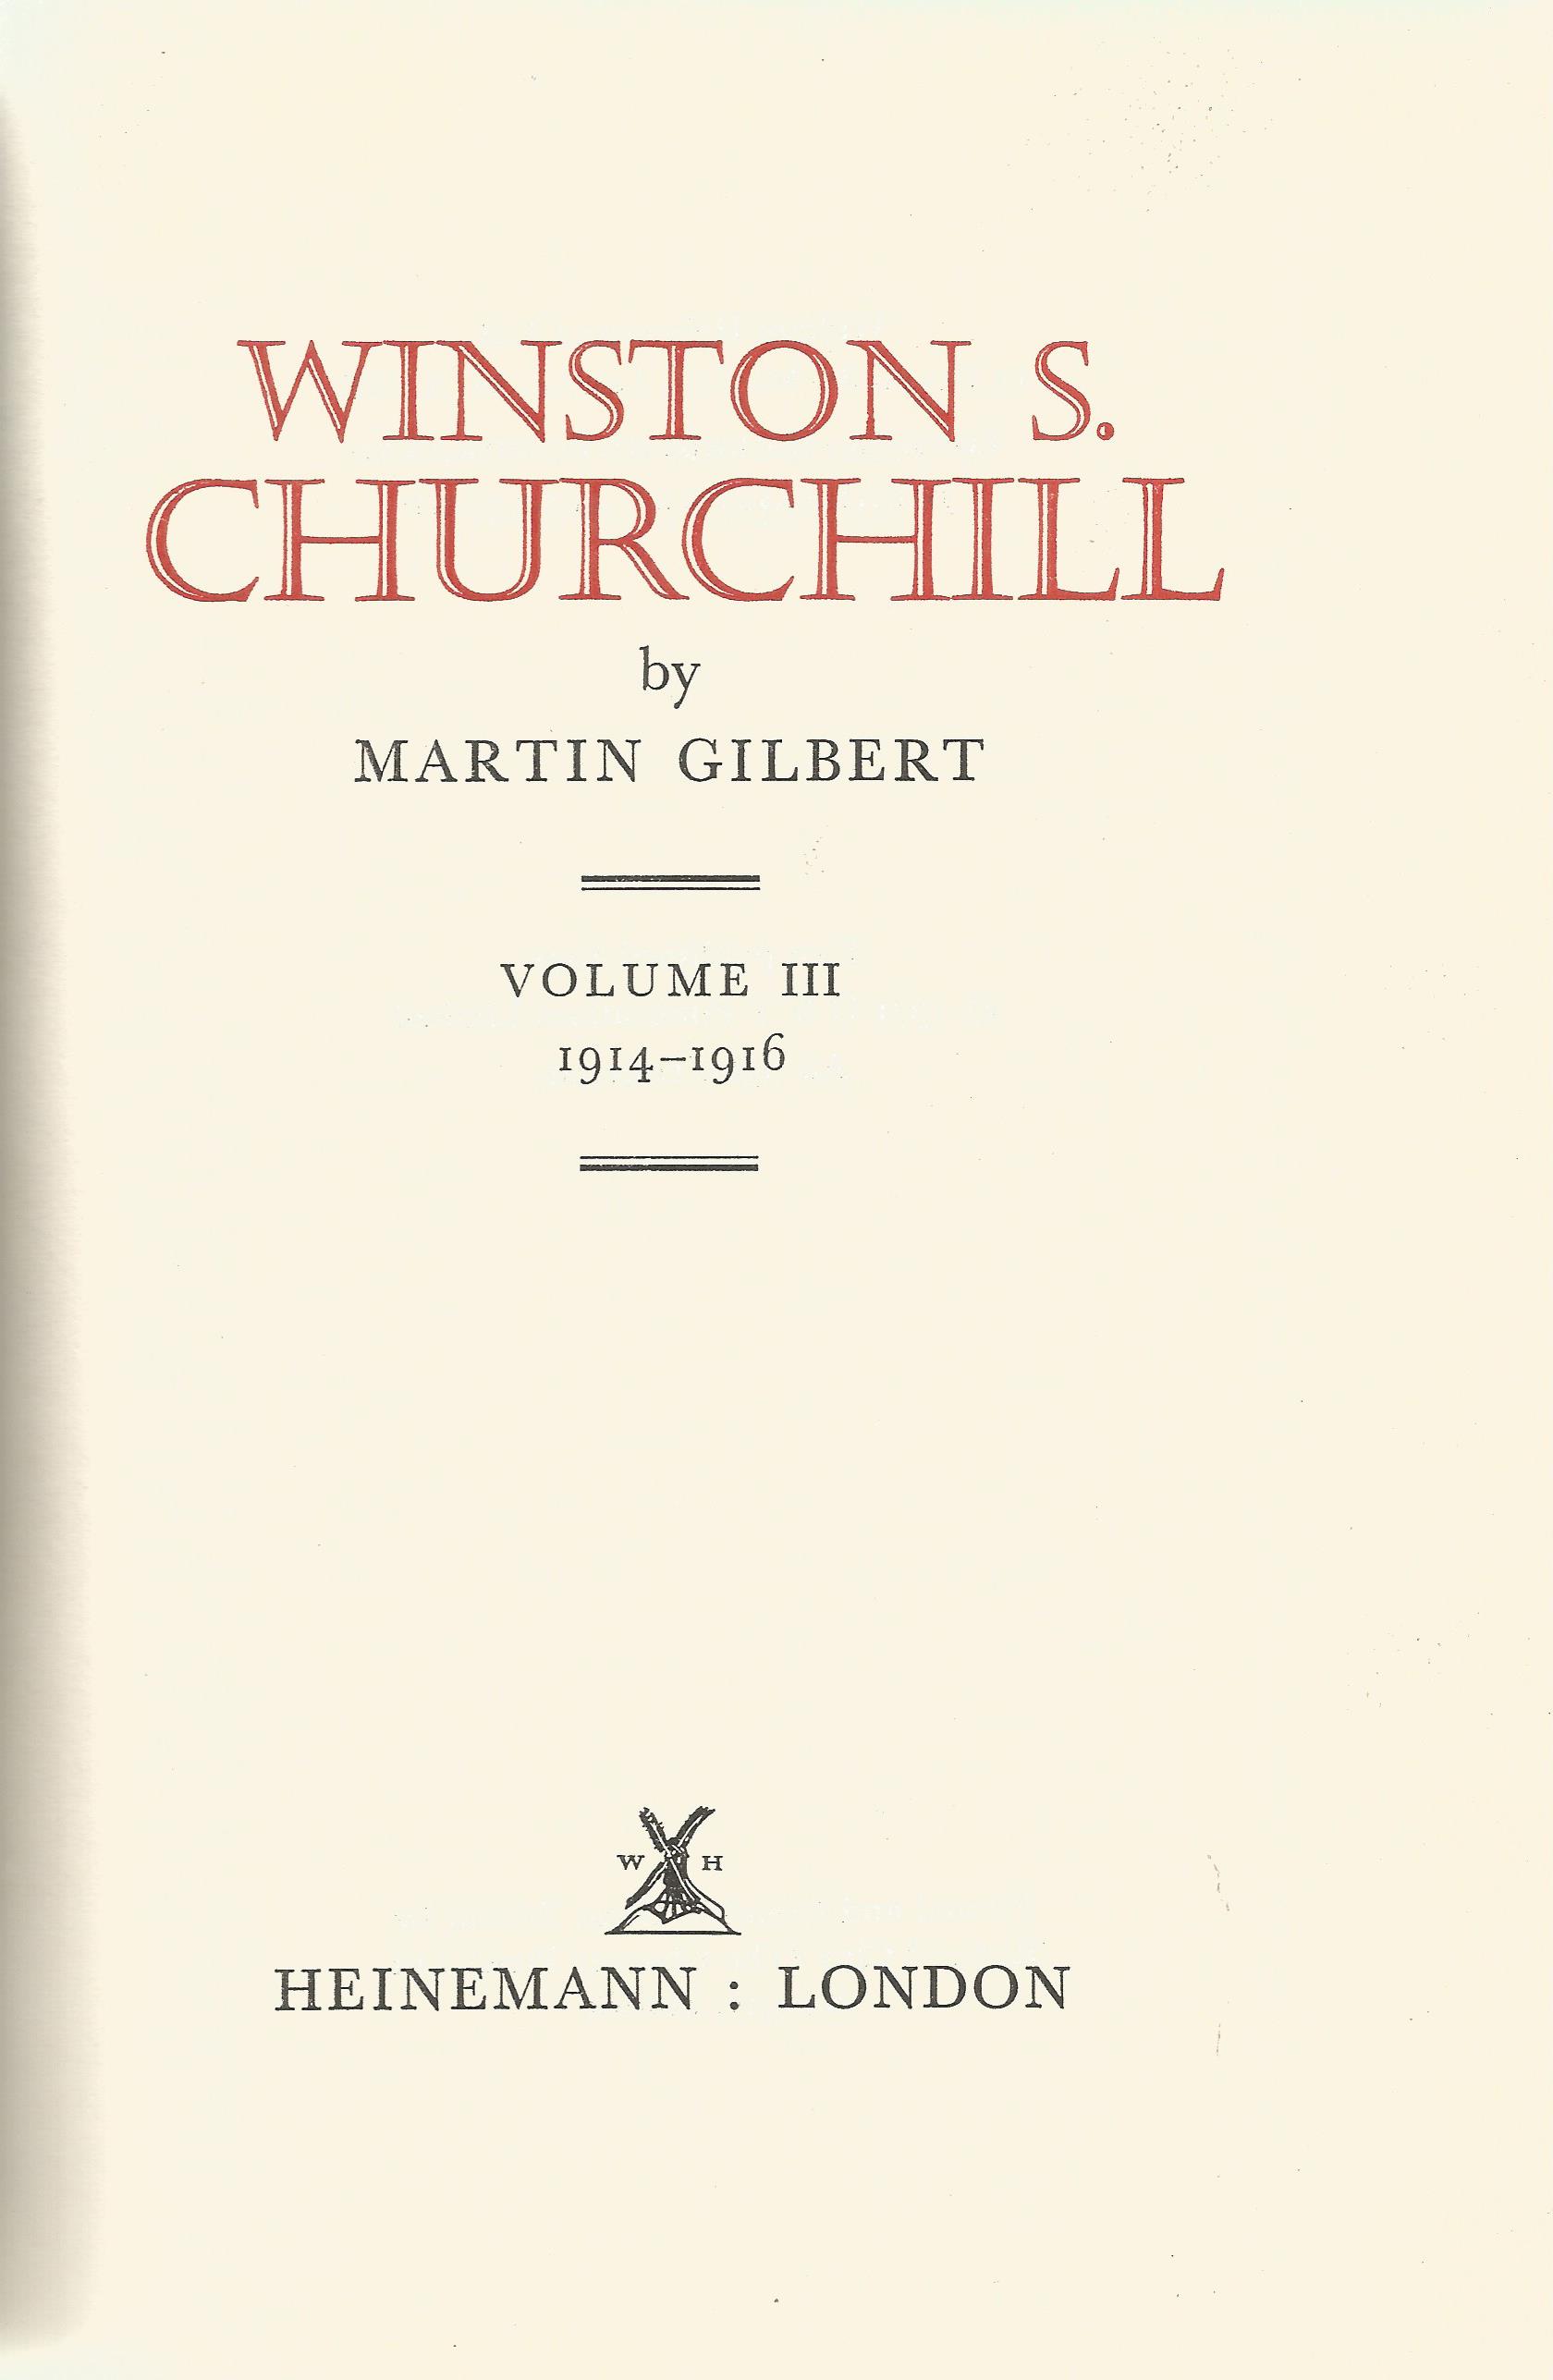 Martin Gilbert hardback book Winston S Churchill - 1914-1916 by Martin Gilbert 1971 published by - Image 2 of 2